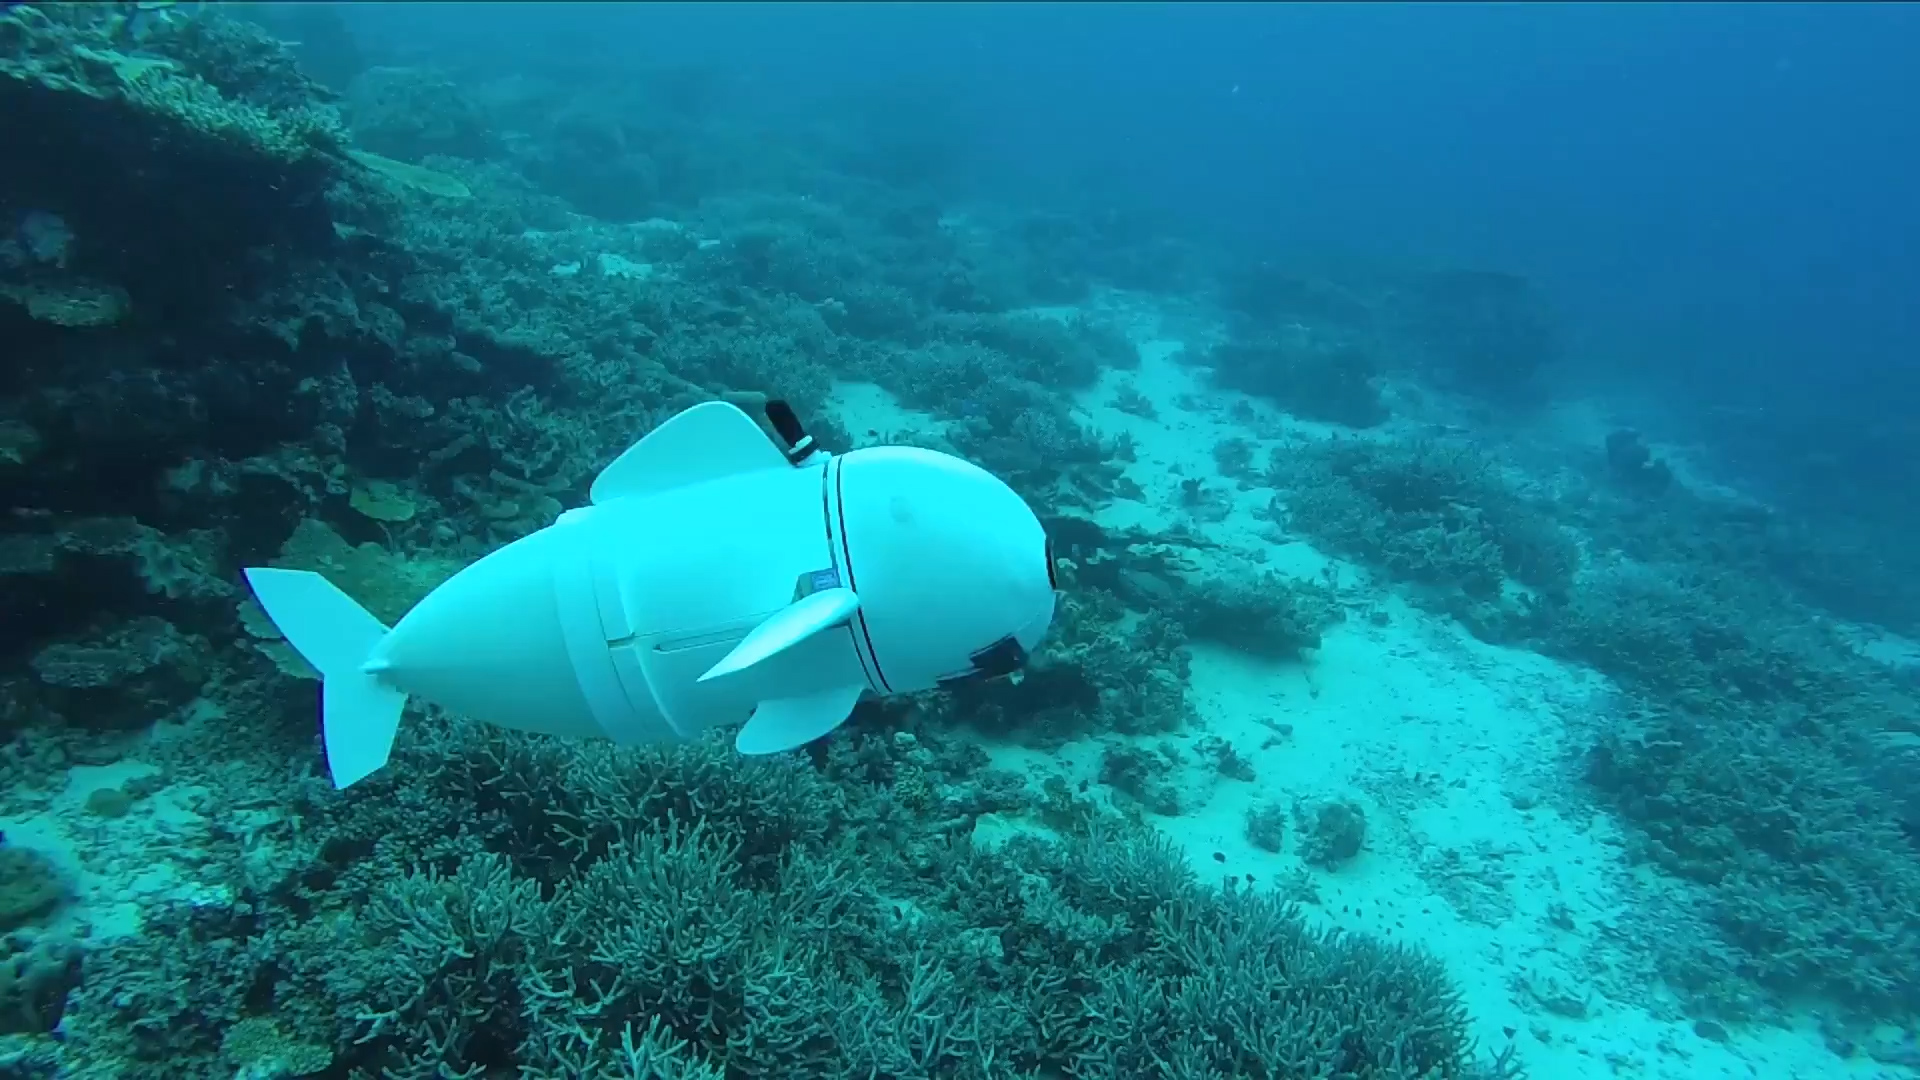 MIT CSAIL's robotic fish can swim with real fish